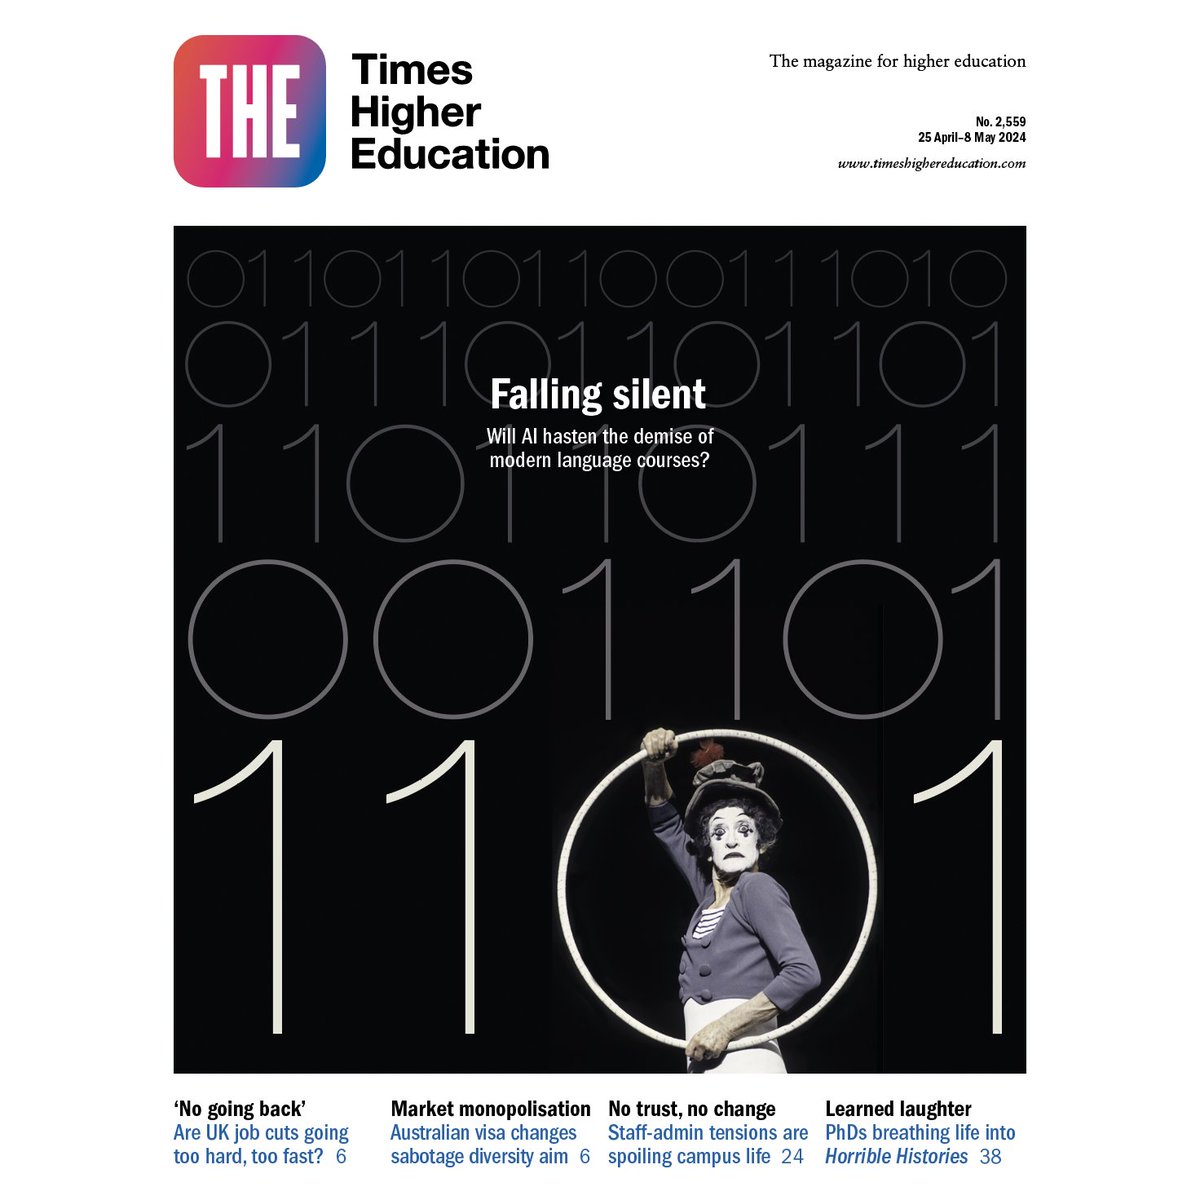 Coming up in the latest @timeshighered magazine: - Is AI the final nail in the coffin for modern languages? - Too hard, too fast? One in three UK campuses now making redundancies - How young academics are breathing new life into Horrible Histories #tomorrowspaperstoday